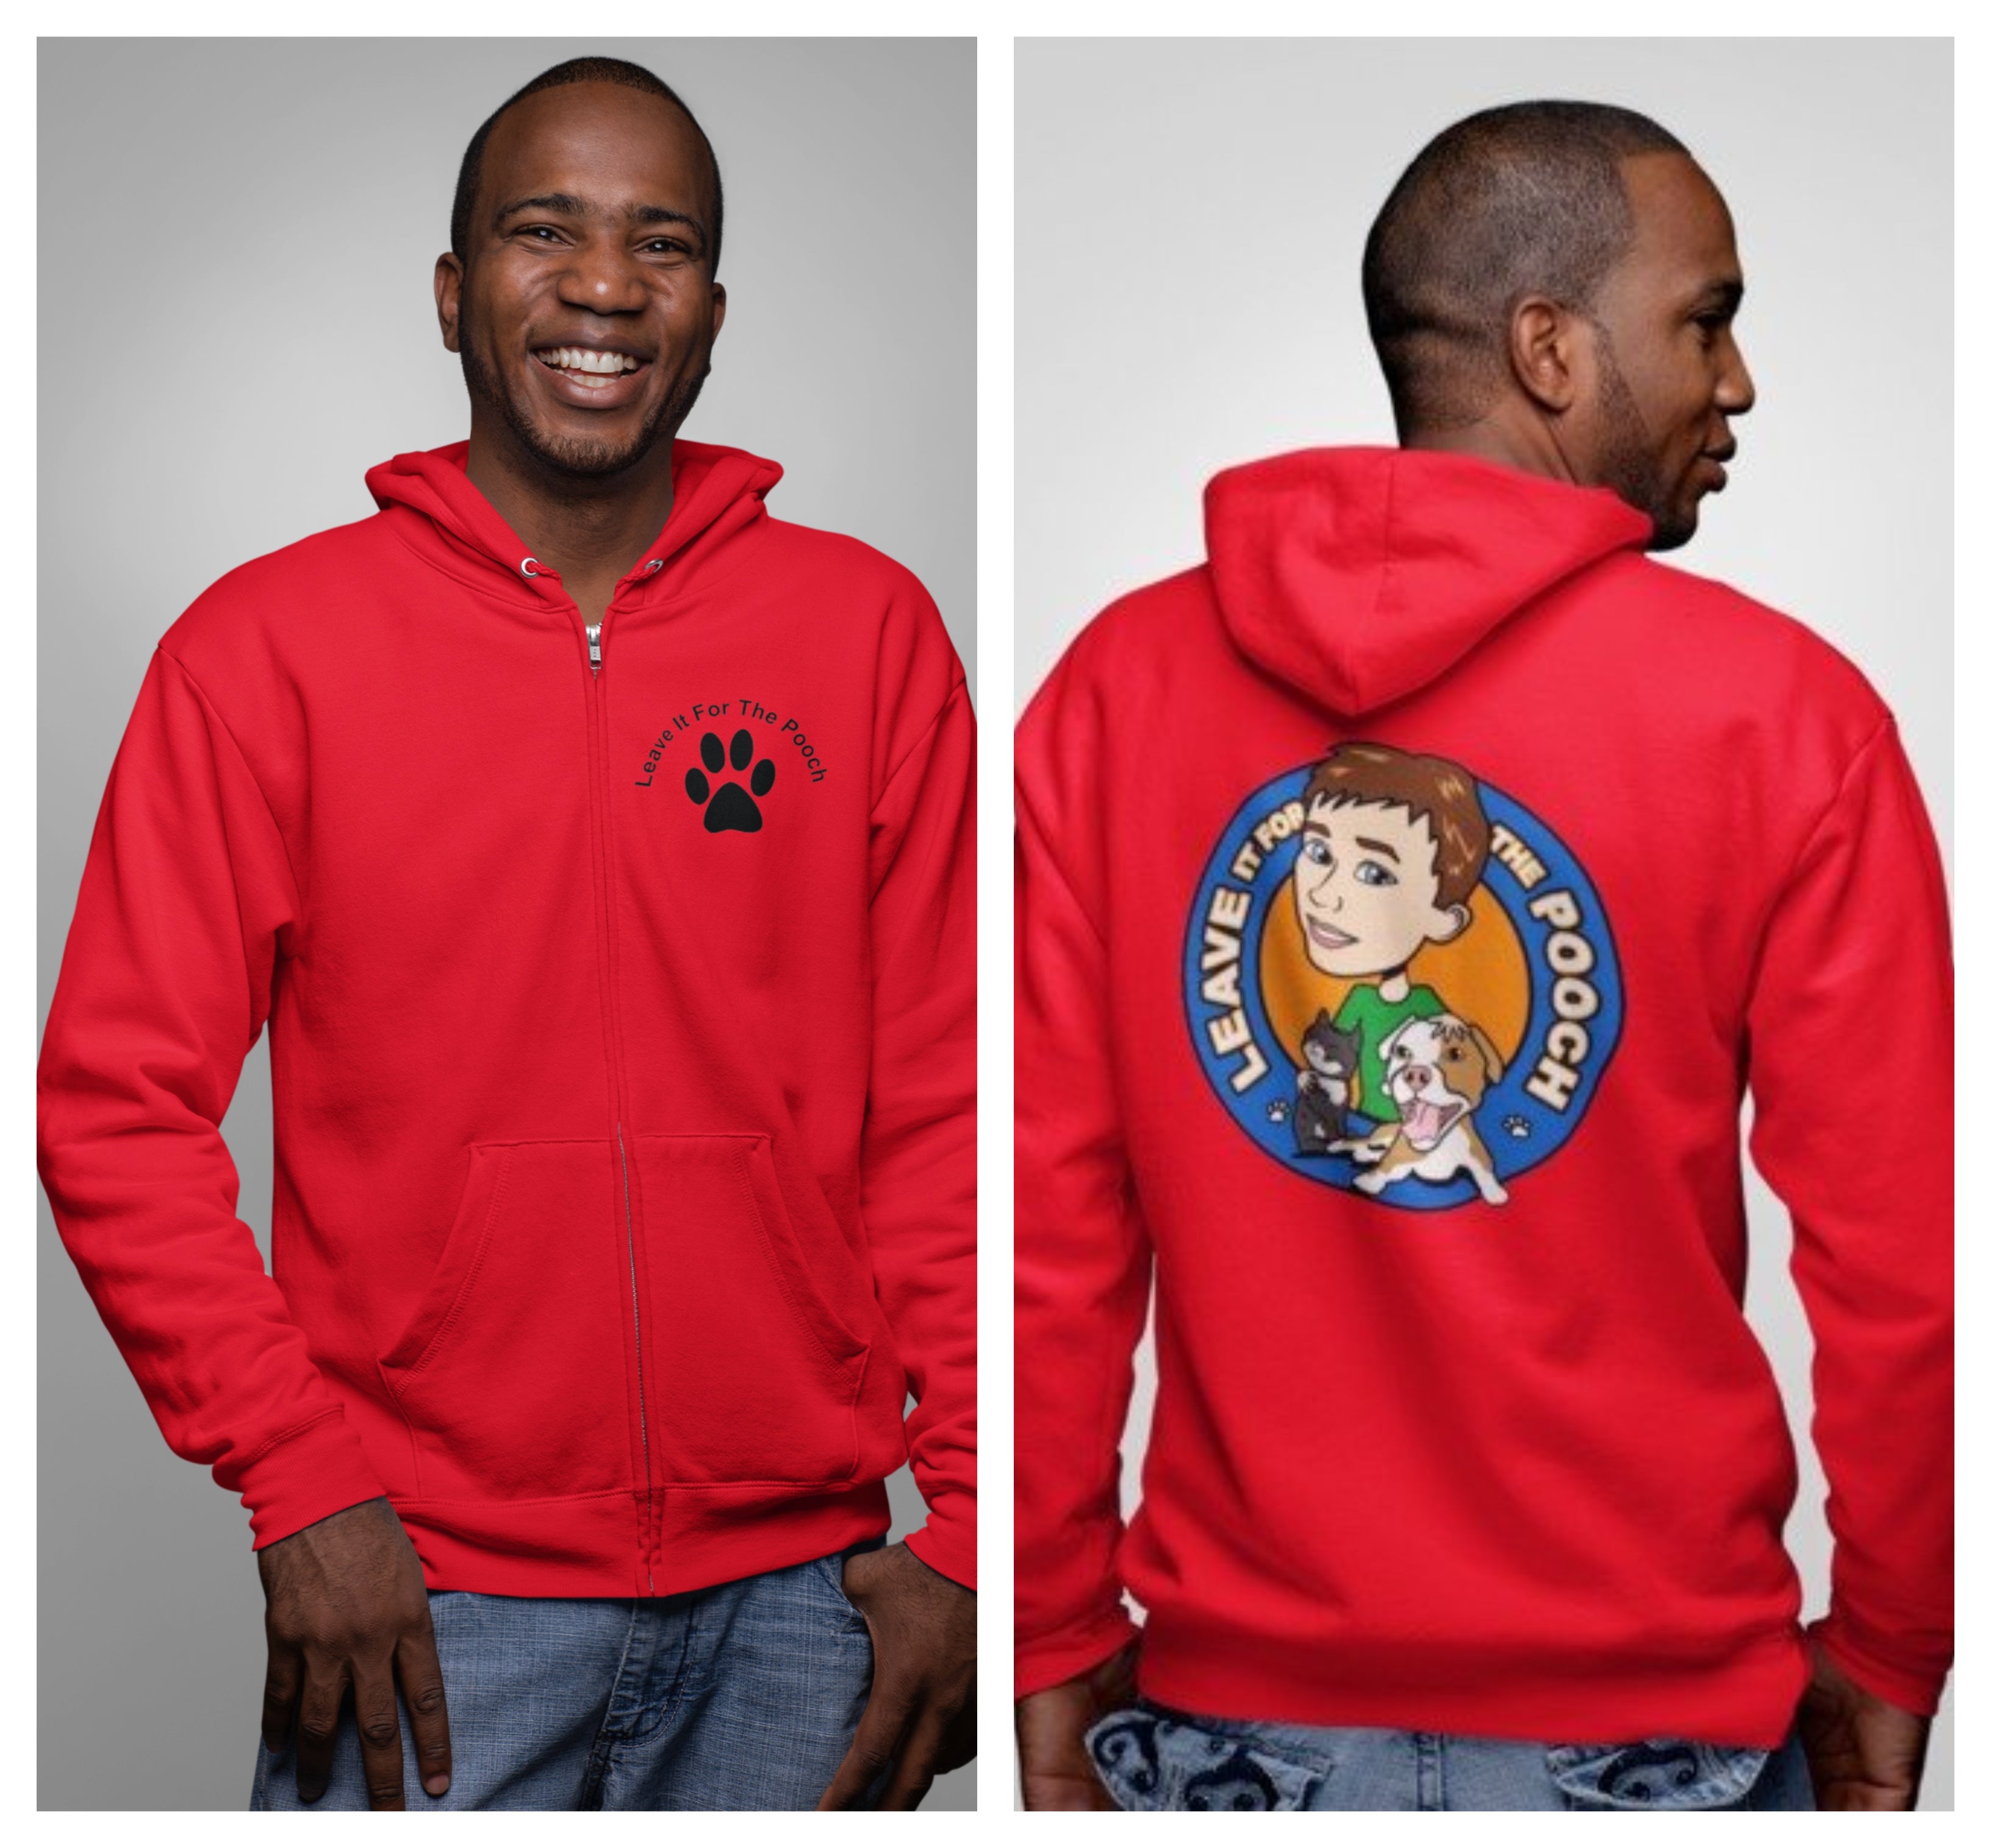 Original Logo Zip Up (Available in several colors)